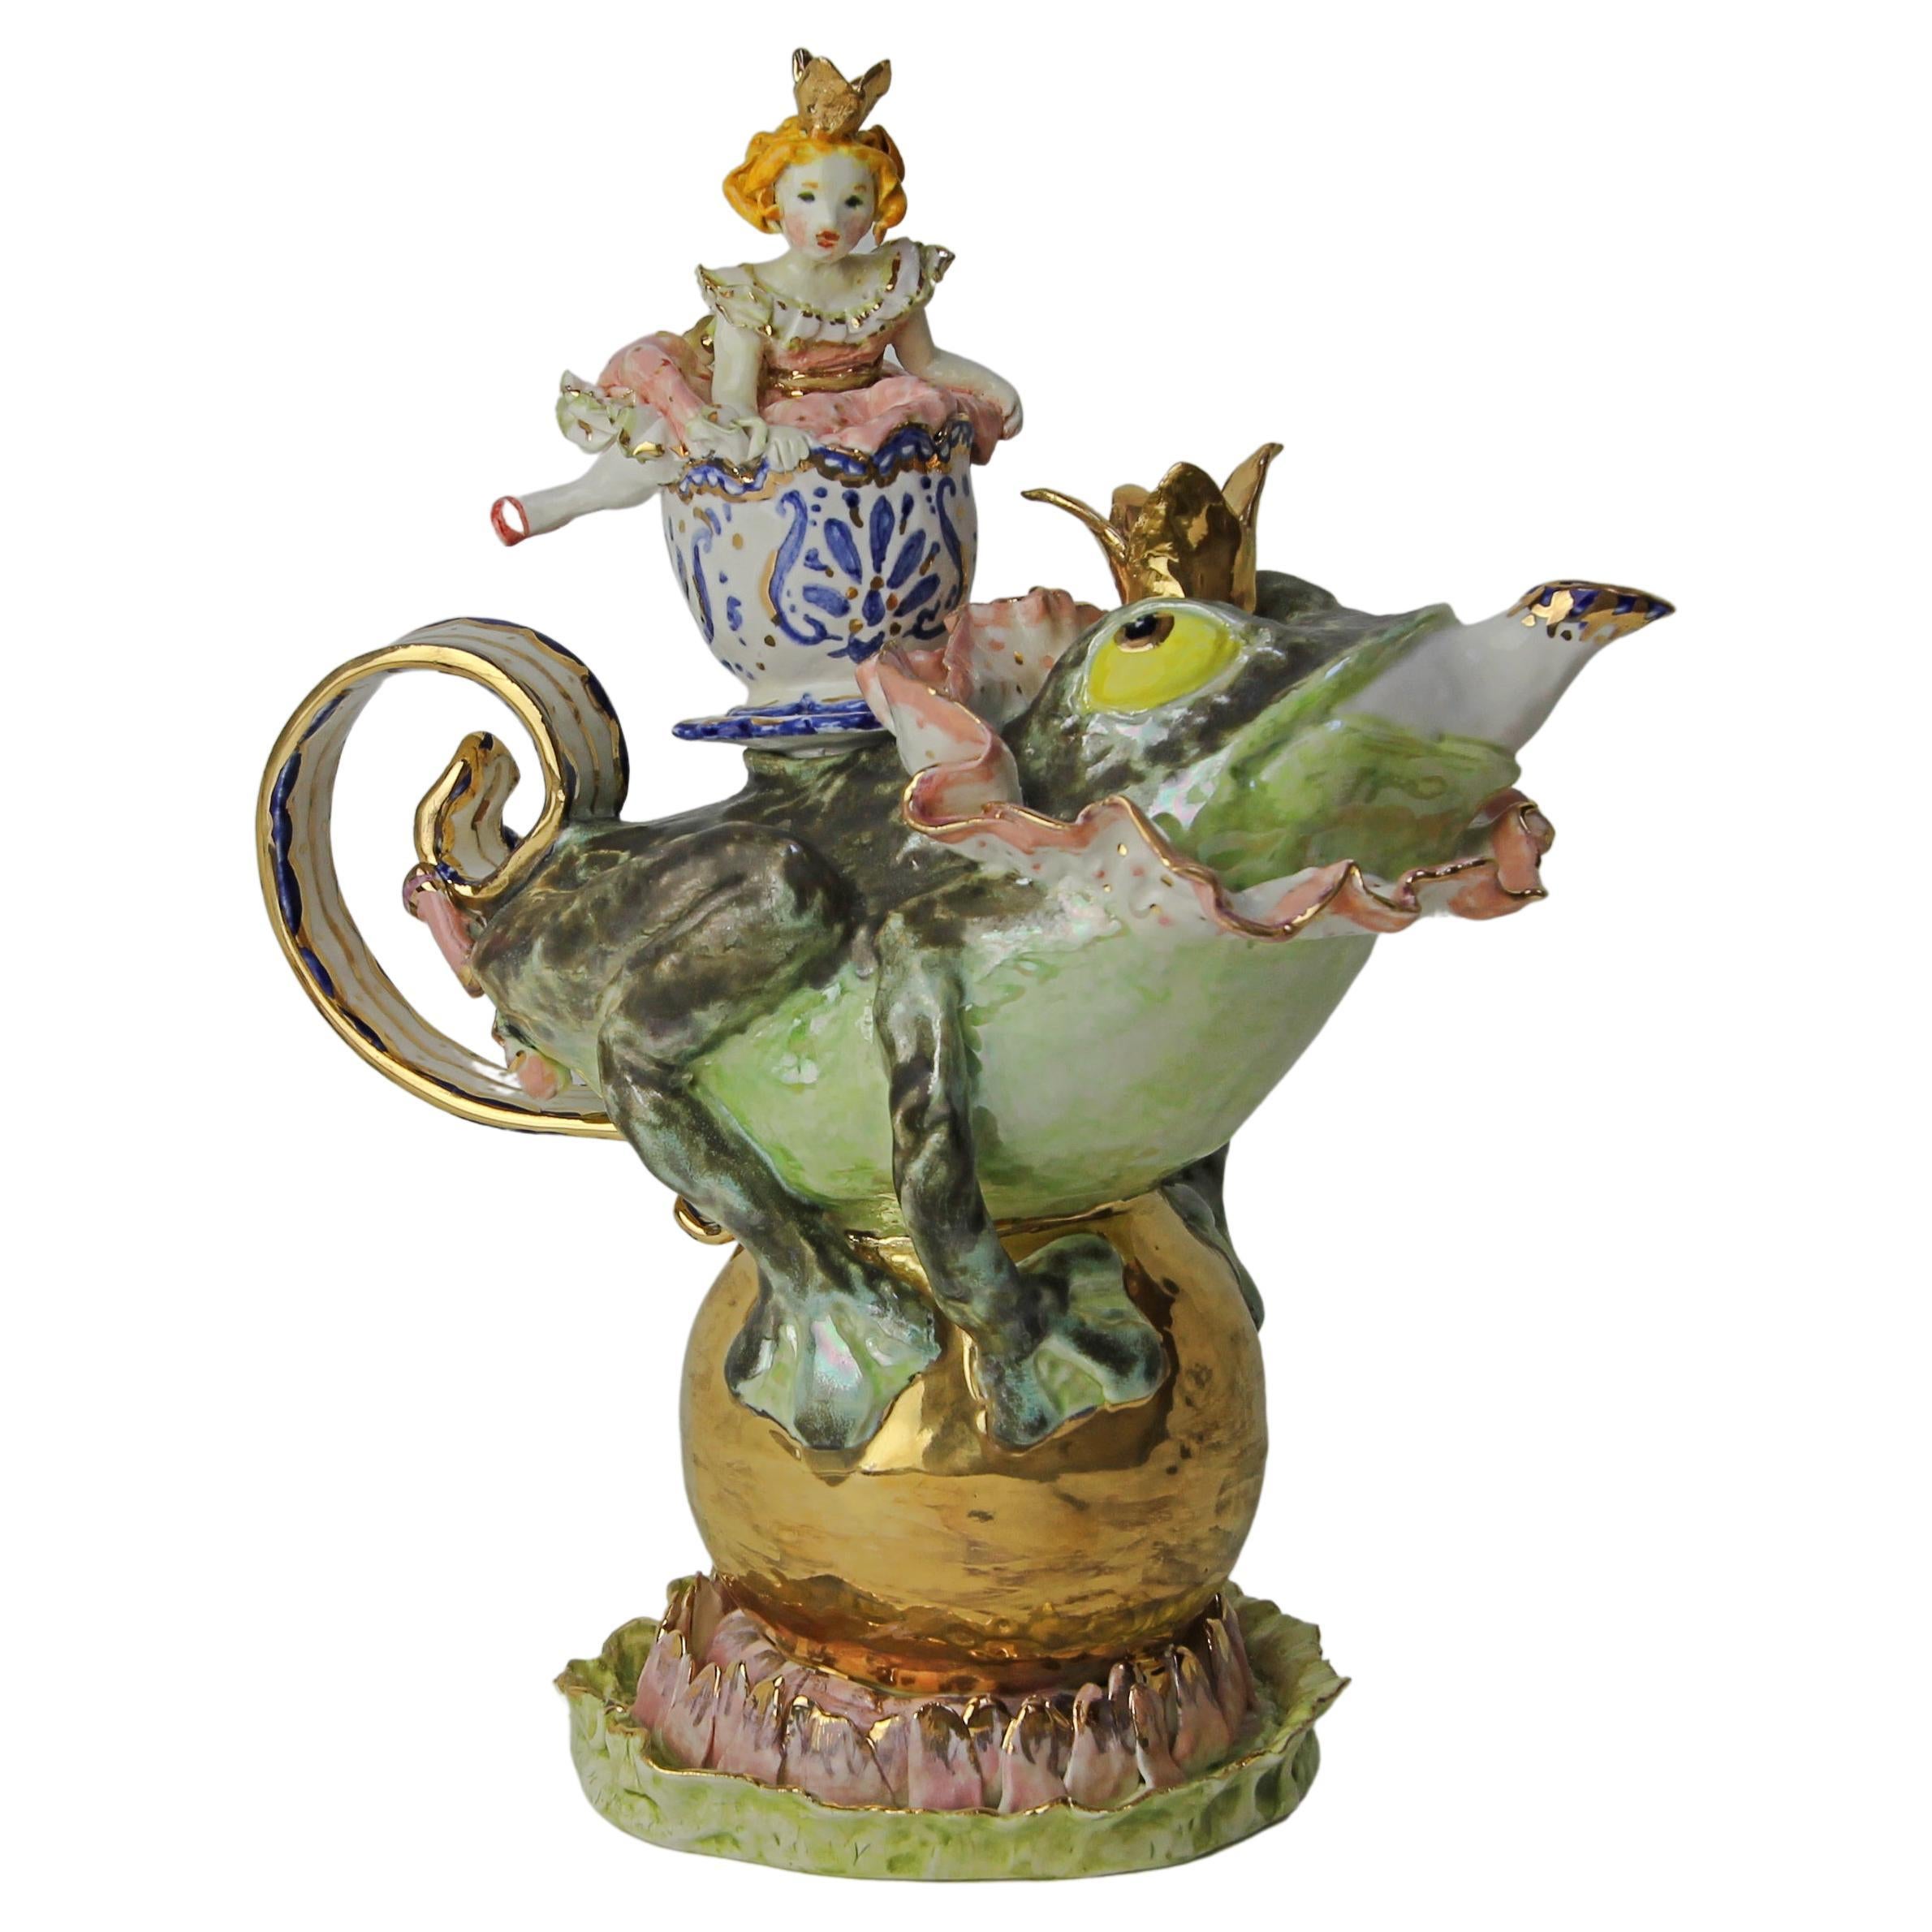 Prince Charming Teapot, Handmade in Italy, Luxury Handcrafted Design 2021 For Sale